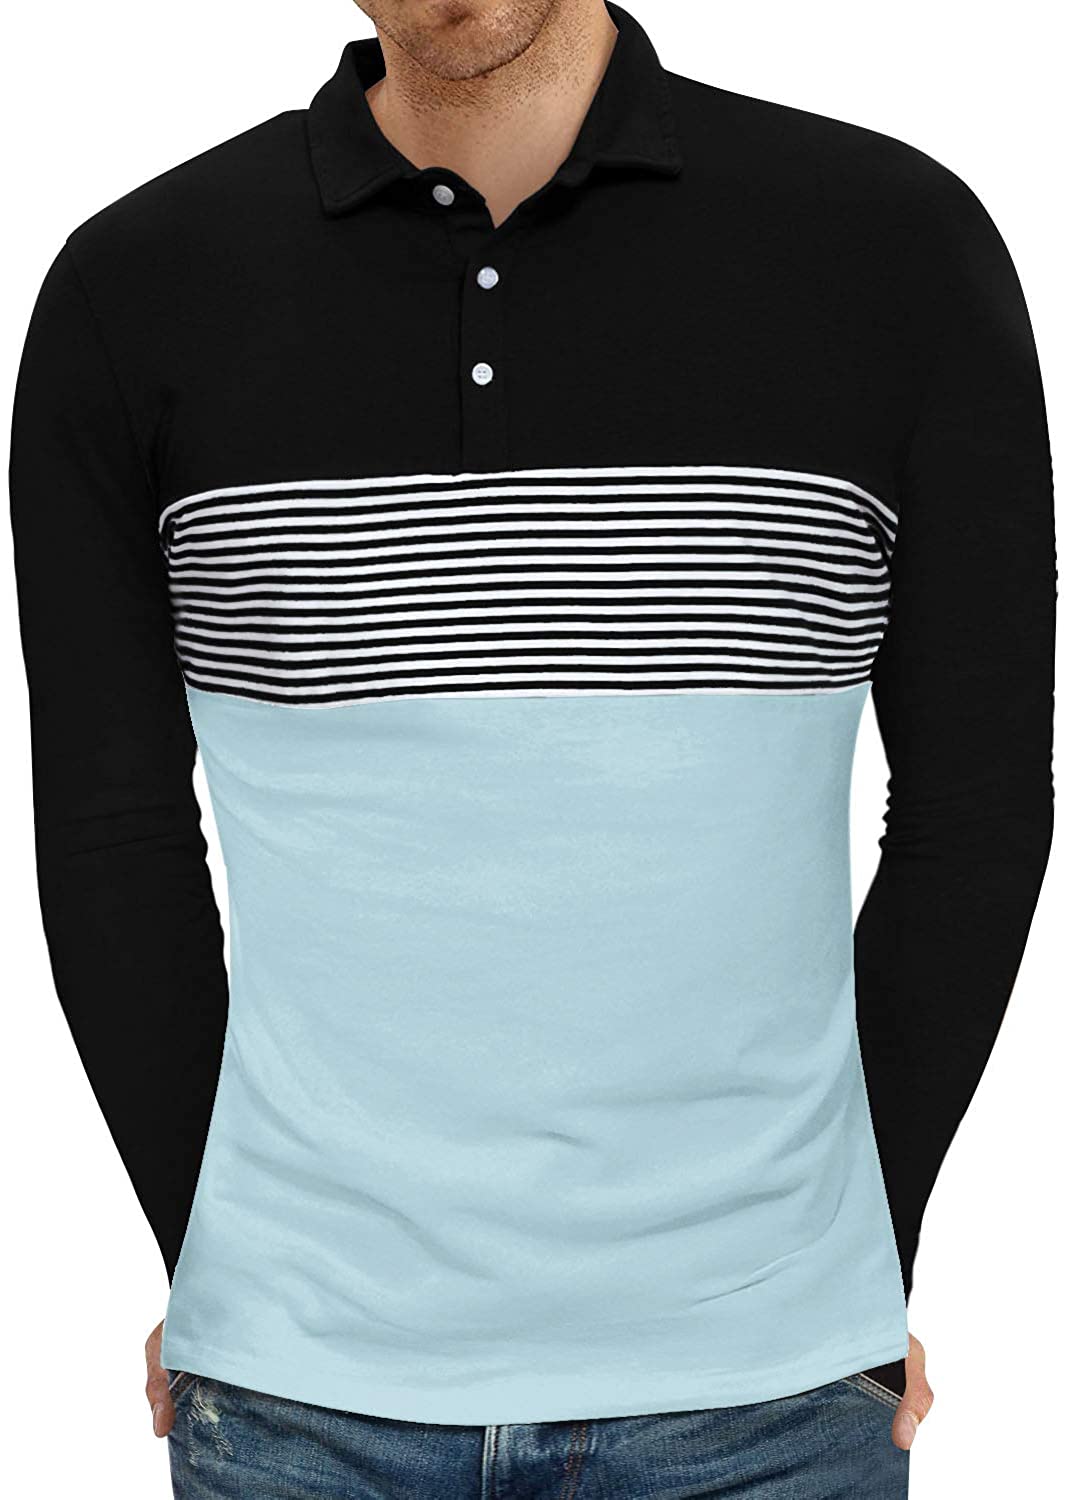 YTD Men's Short Sleeve Polo Shirts Casual Slim Fit Contrast Color Stitching Stripe Cotton Shirts 